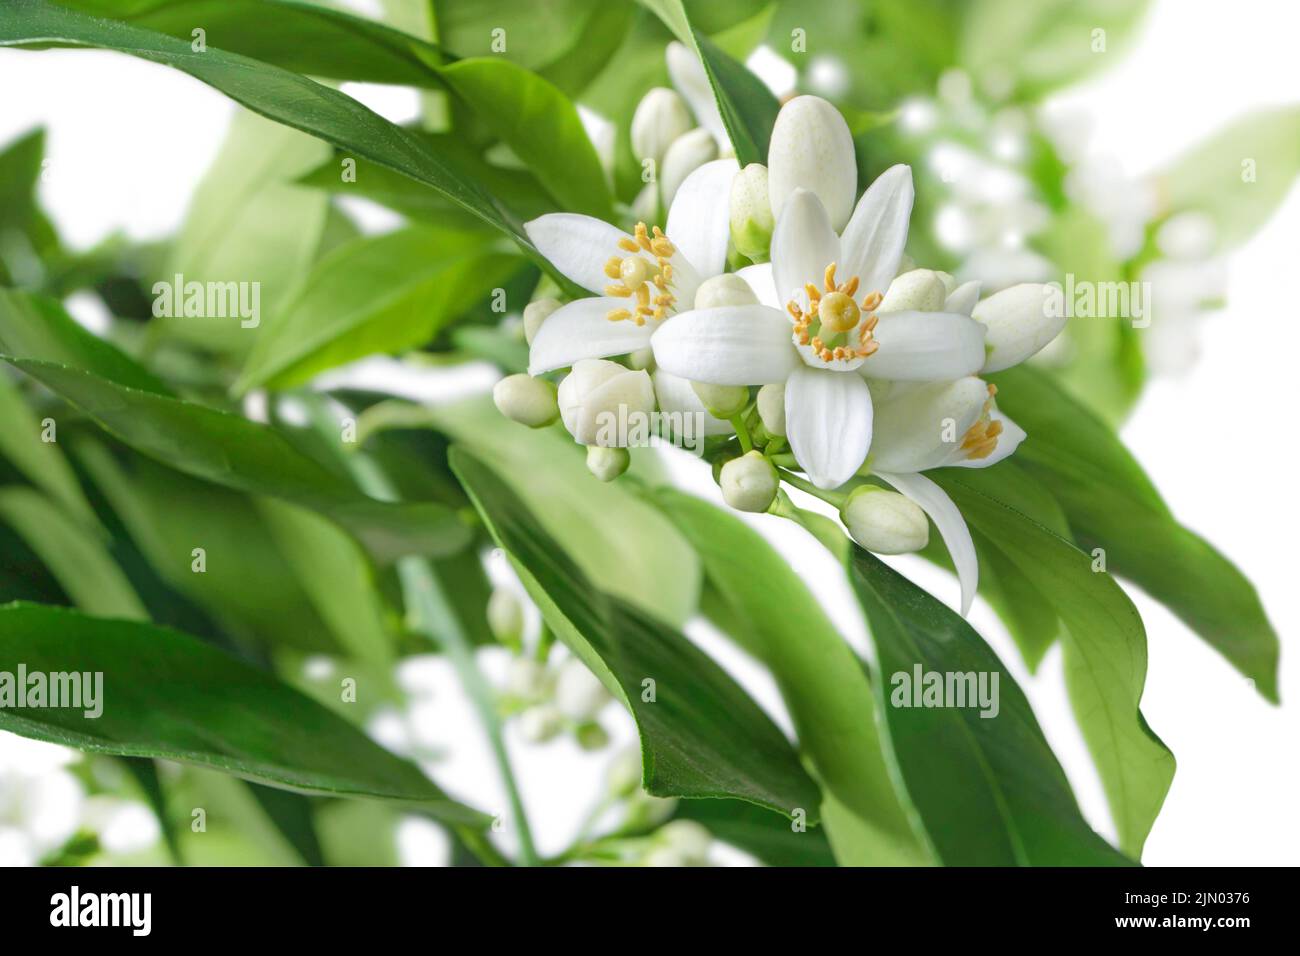 Orange tree branches with flowers, buds and leaves isolated on white. Neroli citrus white bloom. Stock Photo